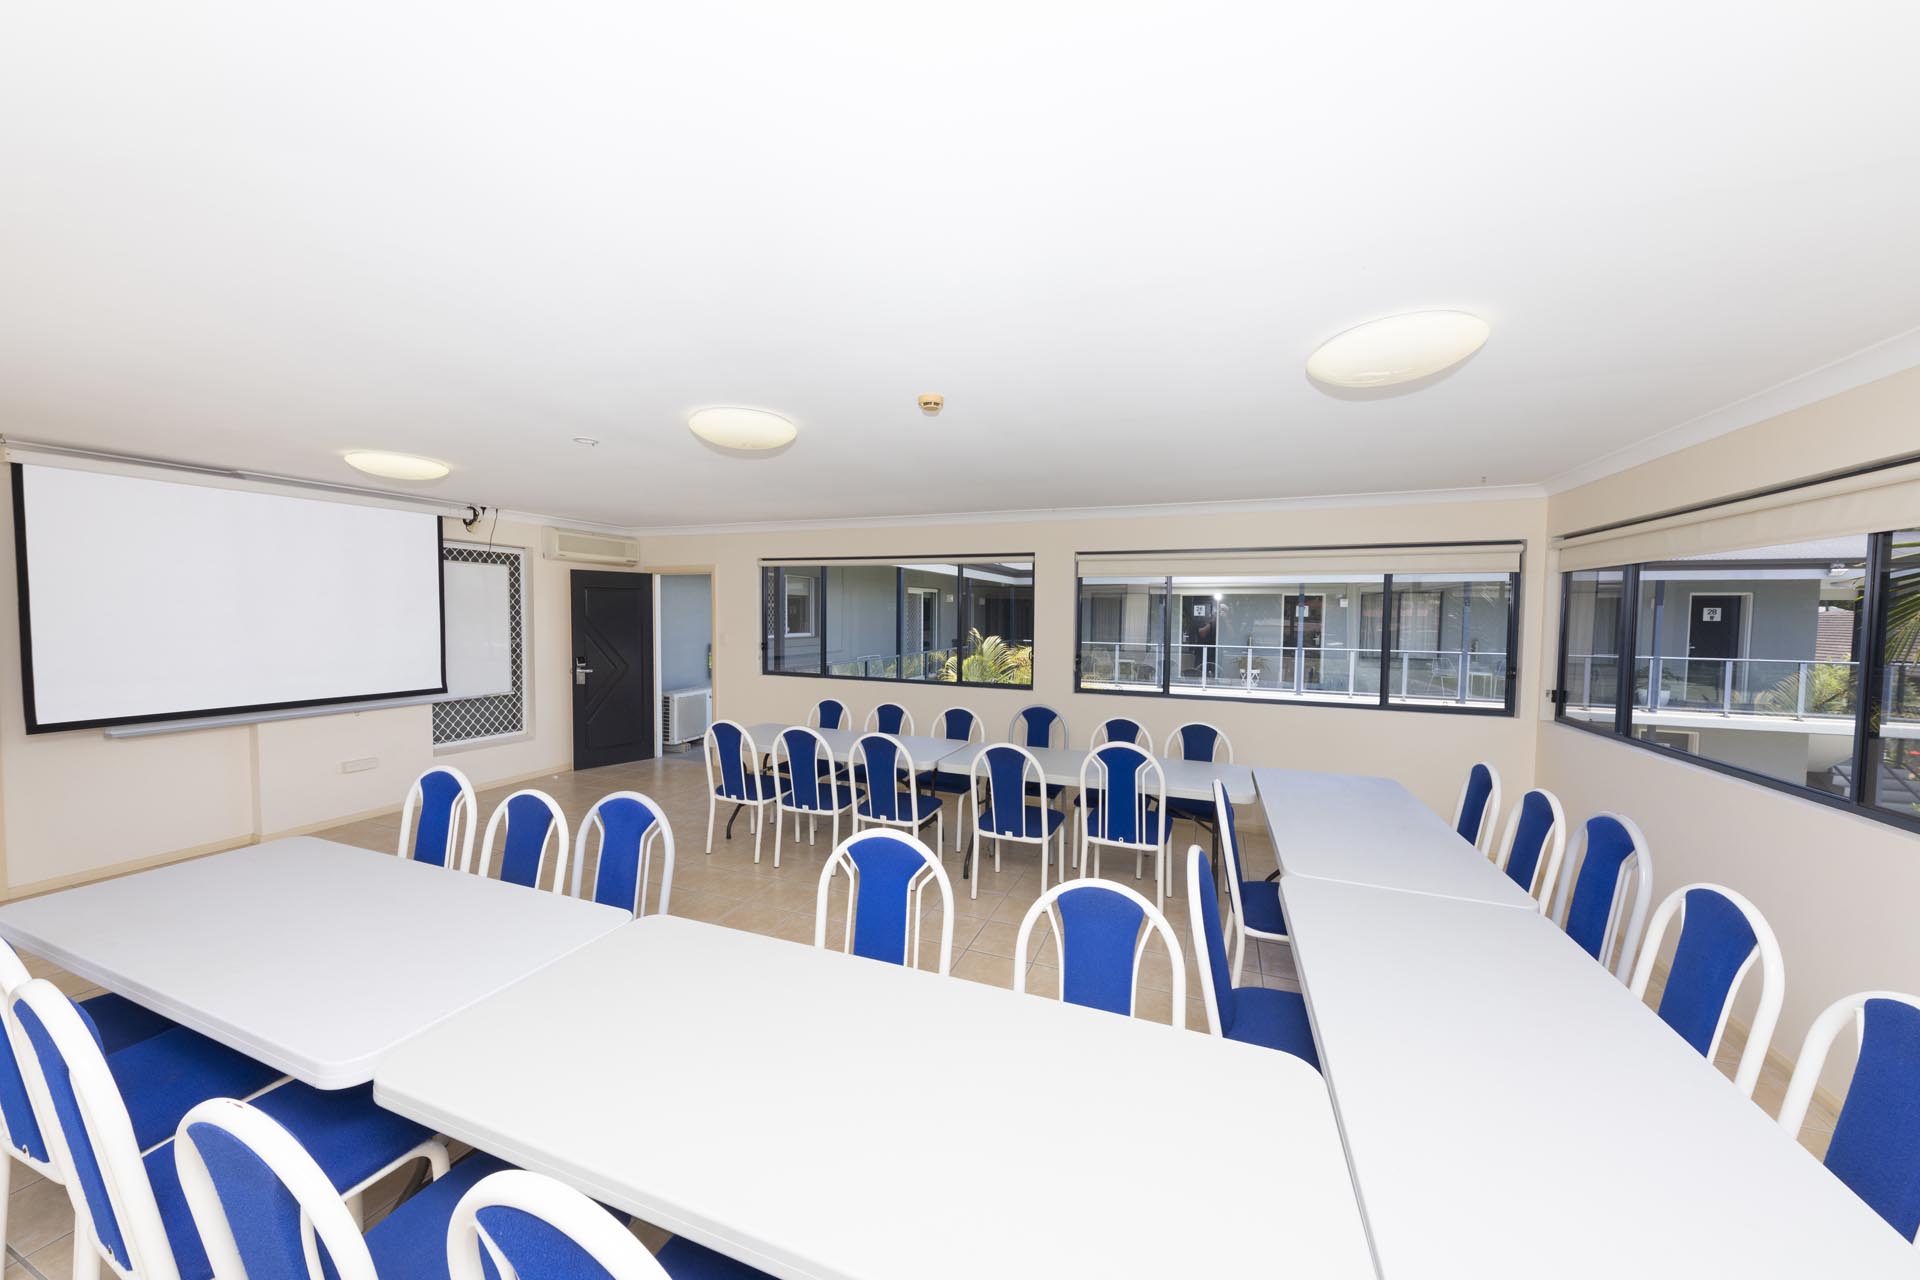 21. Hotel Forster conference room - seating and multimedia facilities